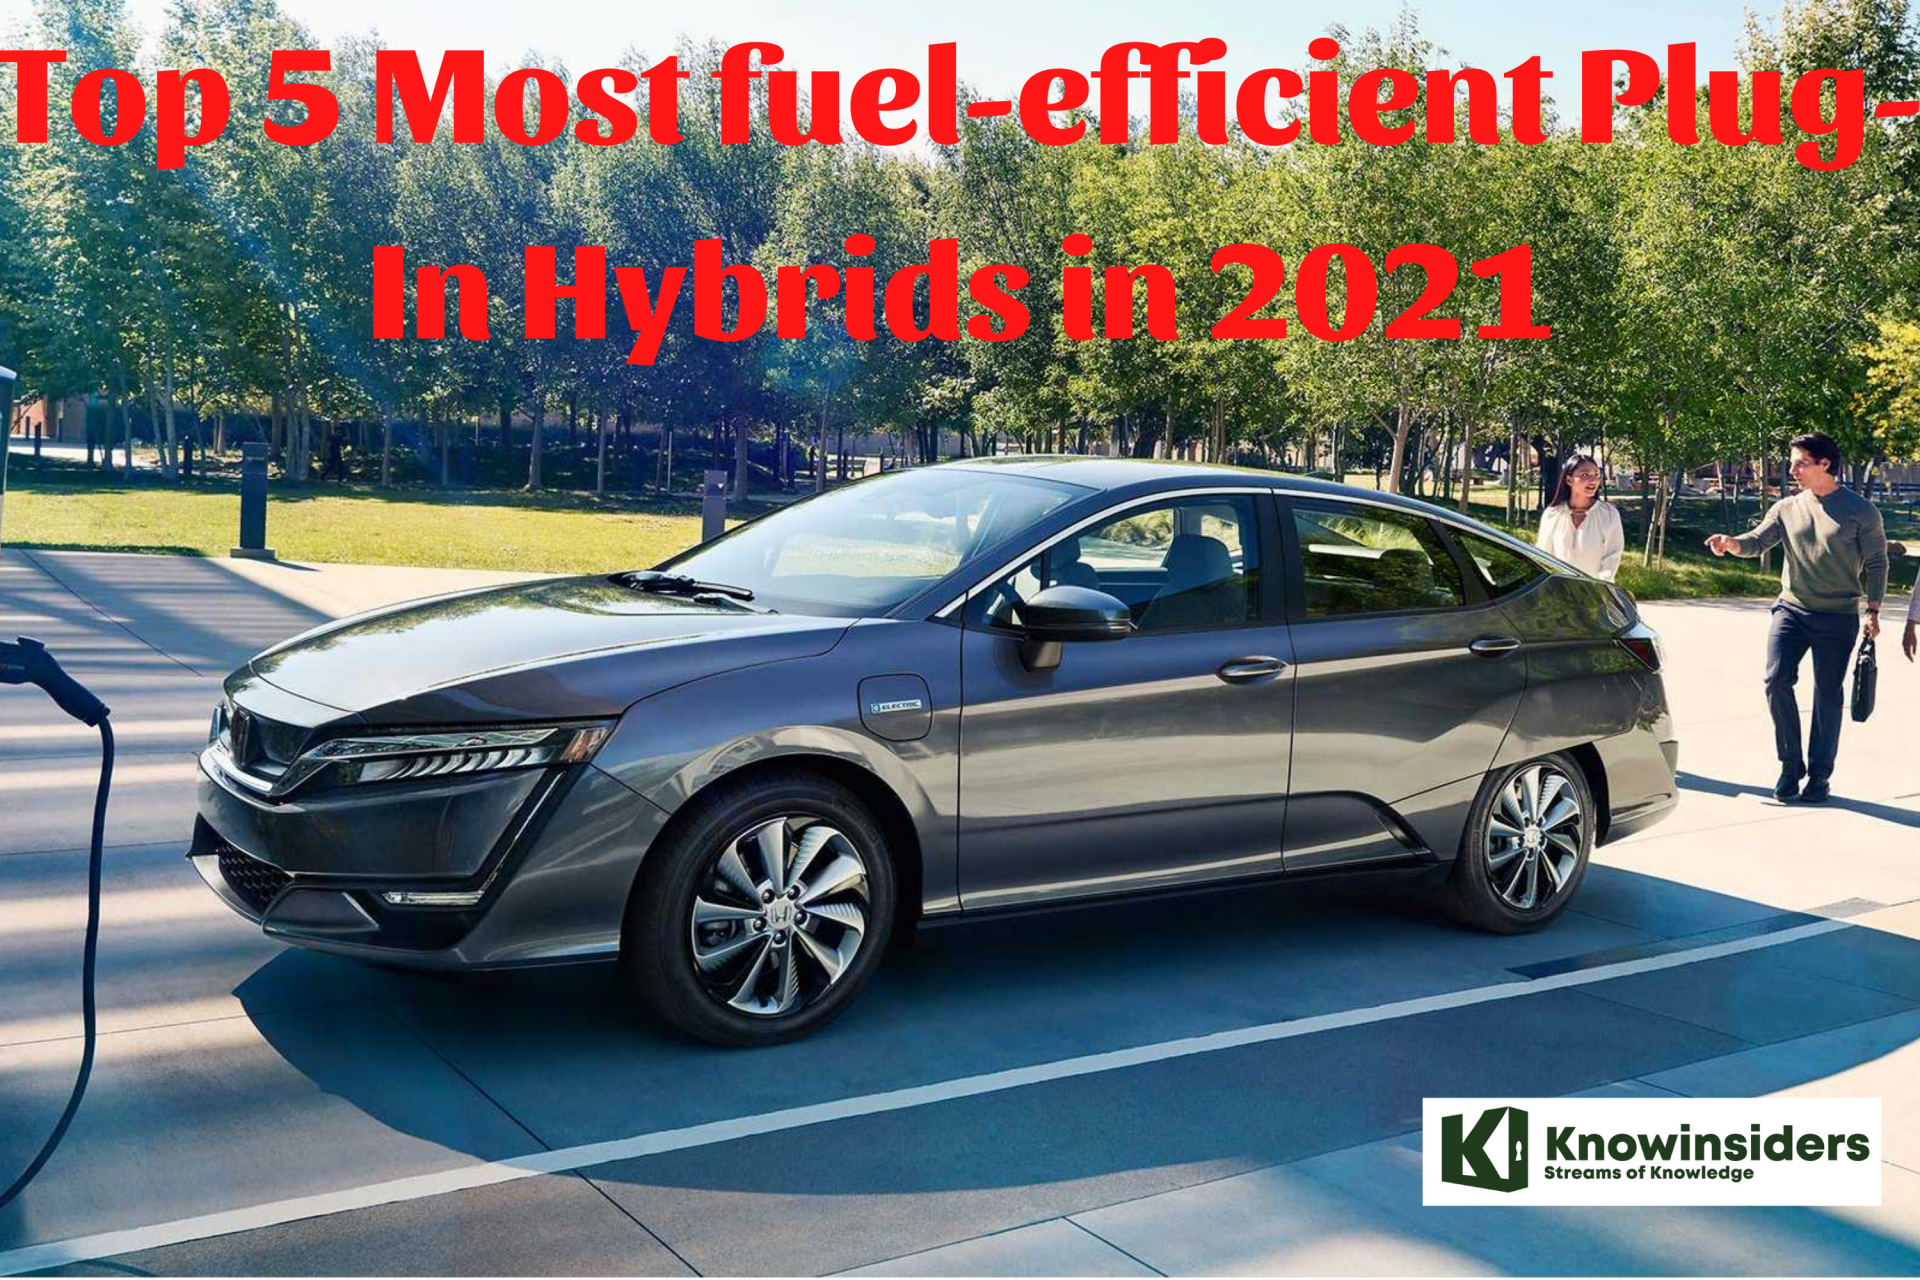 Top 5 Most Fuel-efficient Plug-In Hybrids in 2021